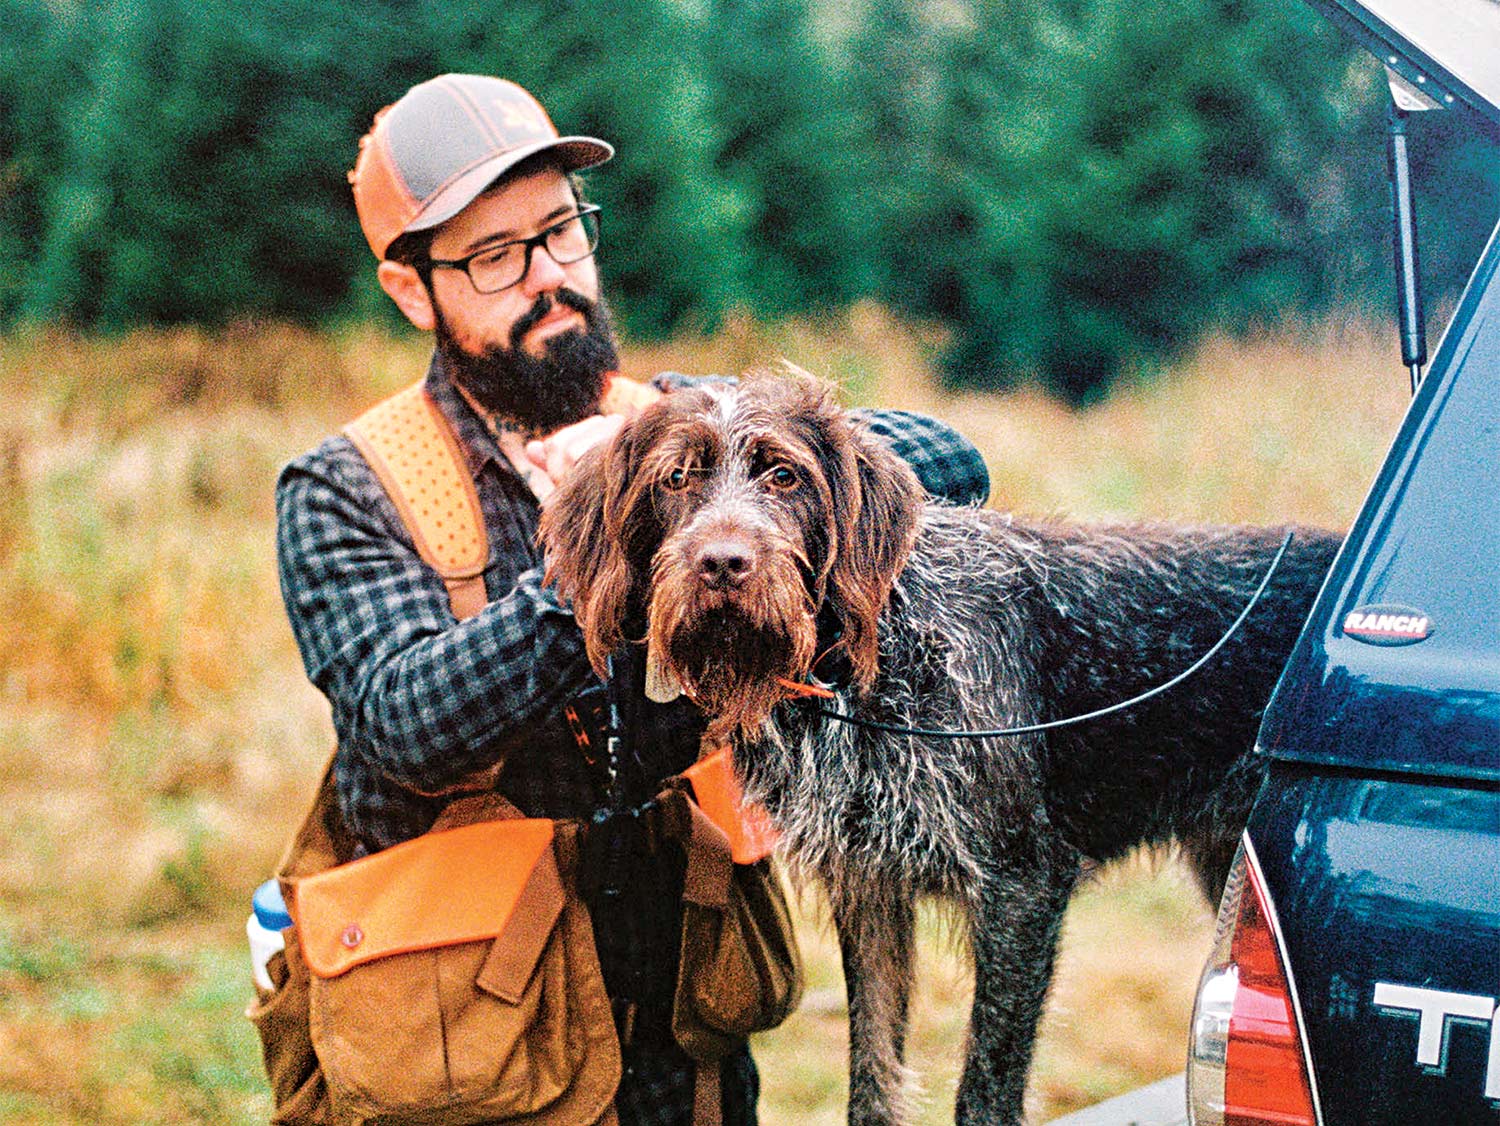 A bearded man wearing glasses and orange reflective hunting gear collars his hunting dog that is standing in the bed of the hunter's truck.